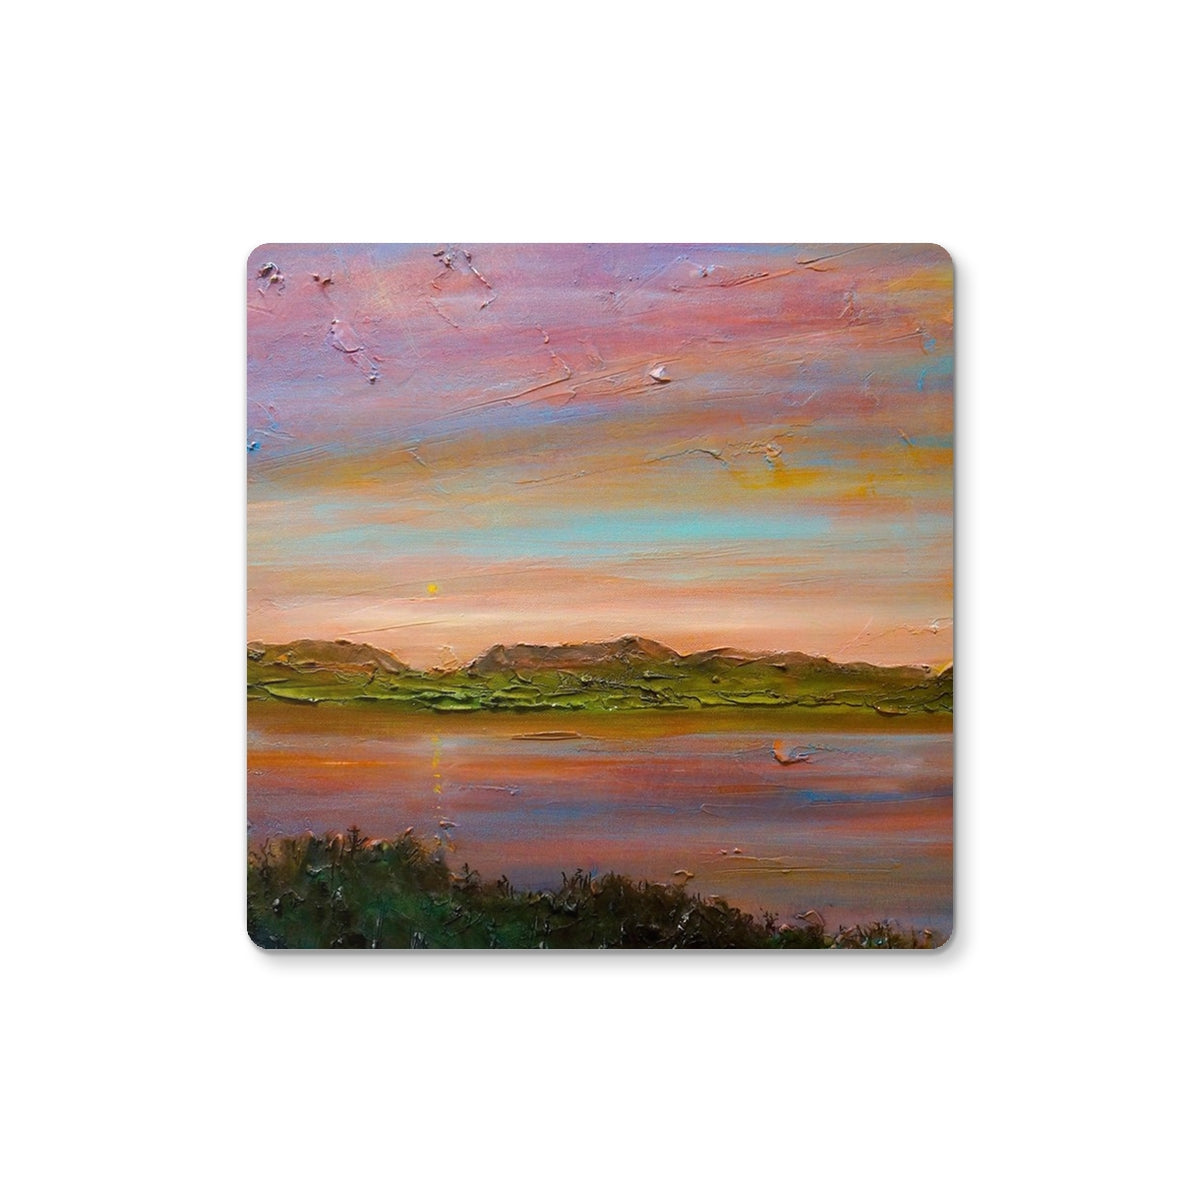 Gourock Golf Club Sunset Art Gifts Coaster-Coasters-River Clyde Art Gallery-2 Coasters-Paintings, Prints, Homeware, Art Gifts From Scotland By Scottish Artist Kevin Hunter